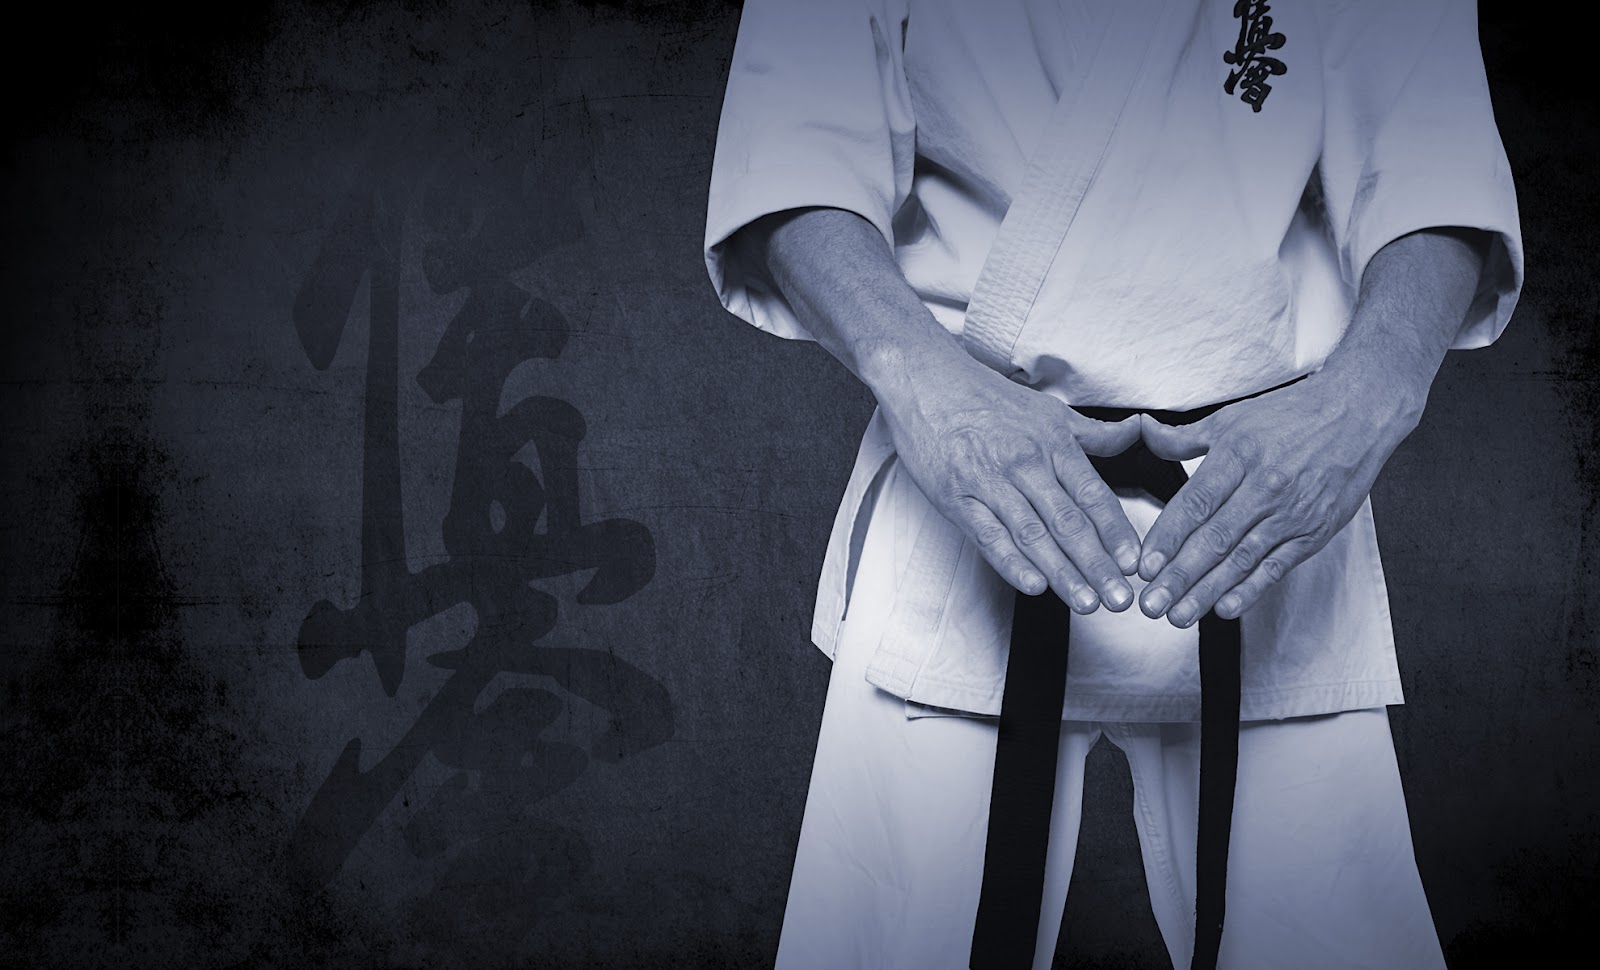 Cool Karate Wallpaper And sublimate of karate